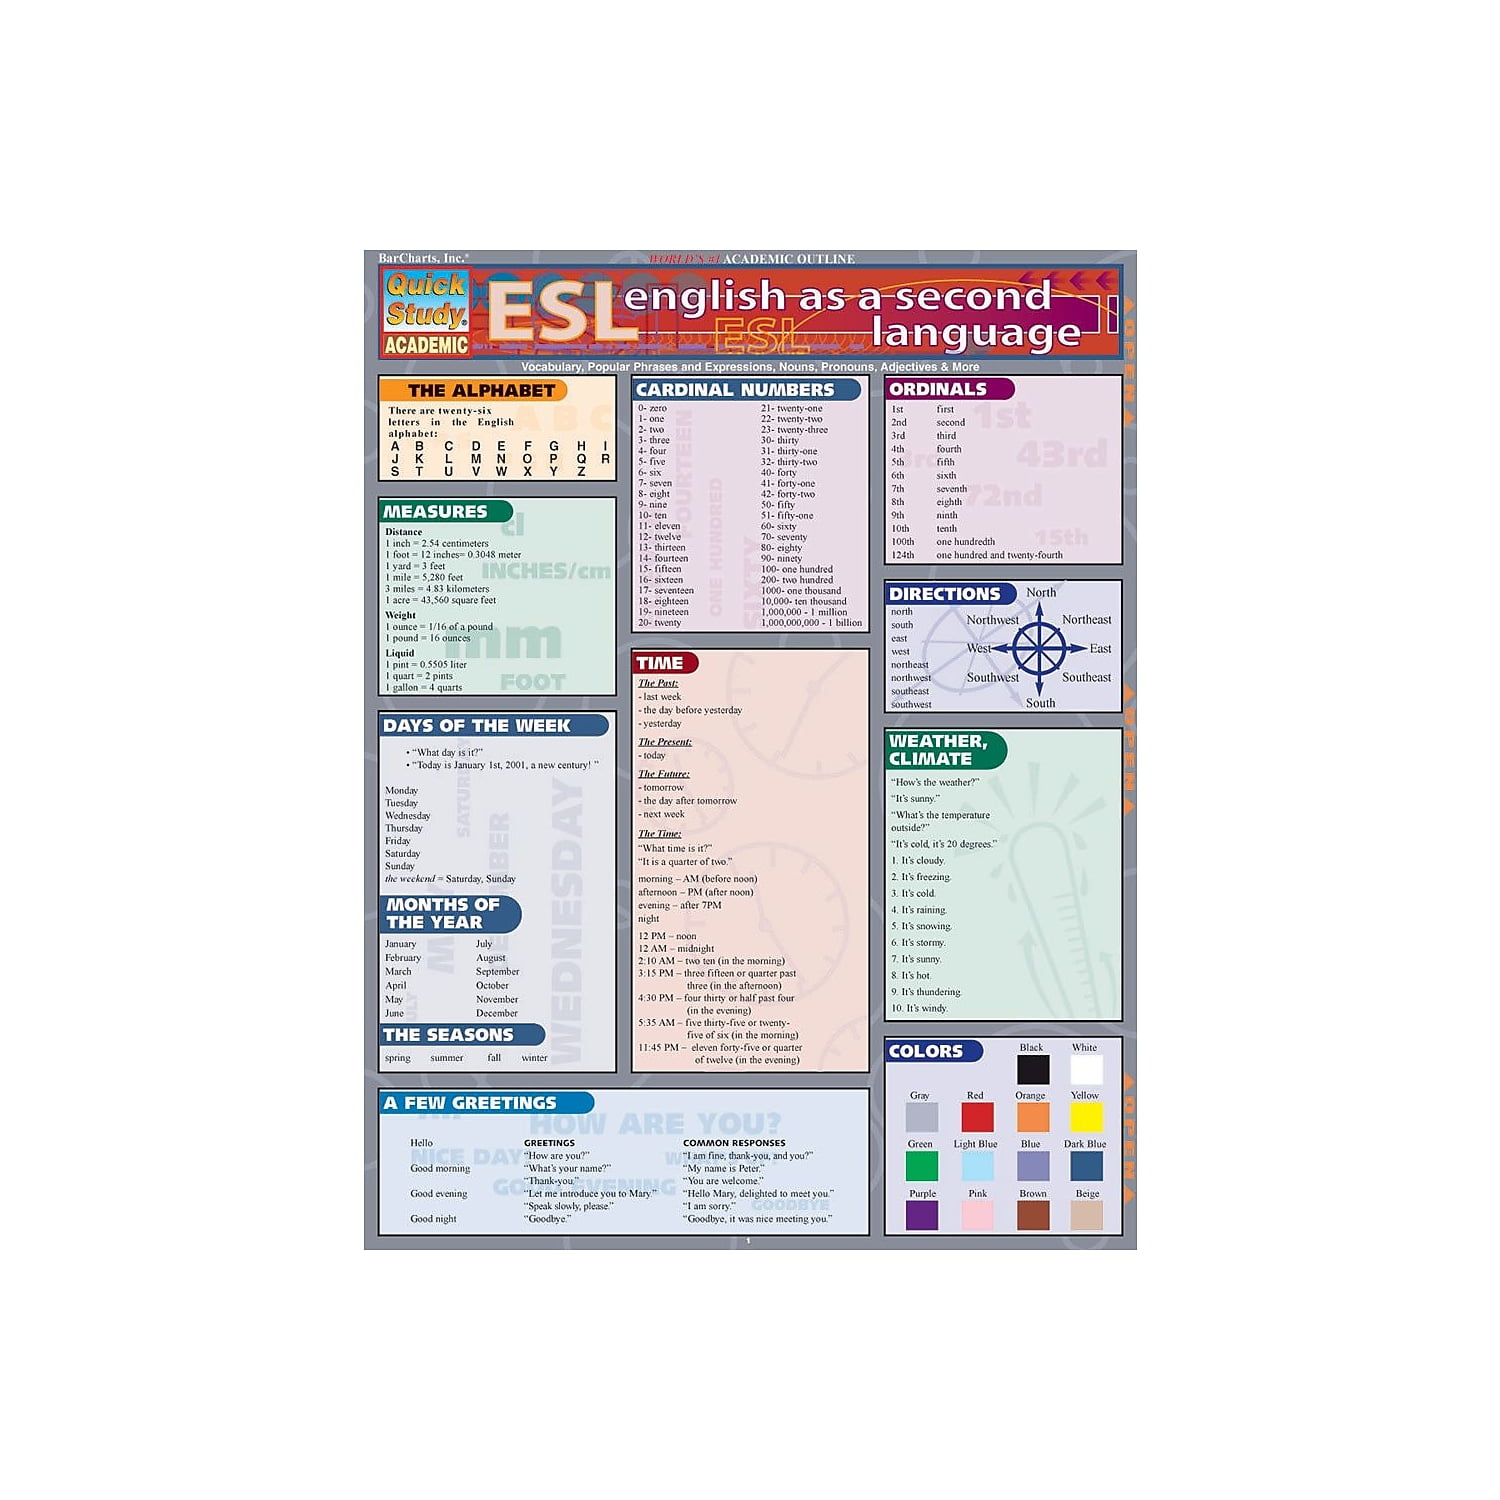 Spanish Vocabulary by BarCharts, Inc.